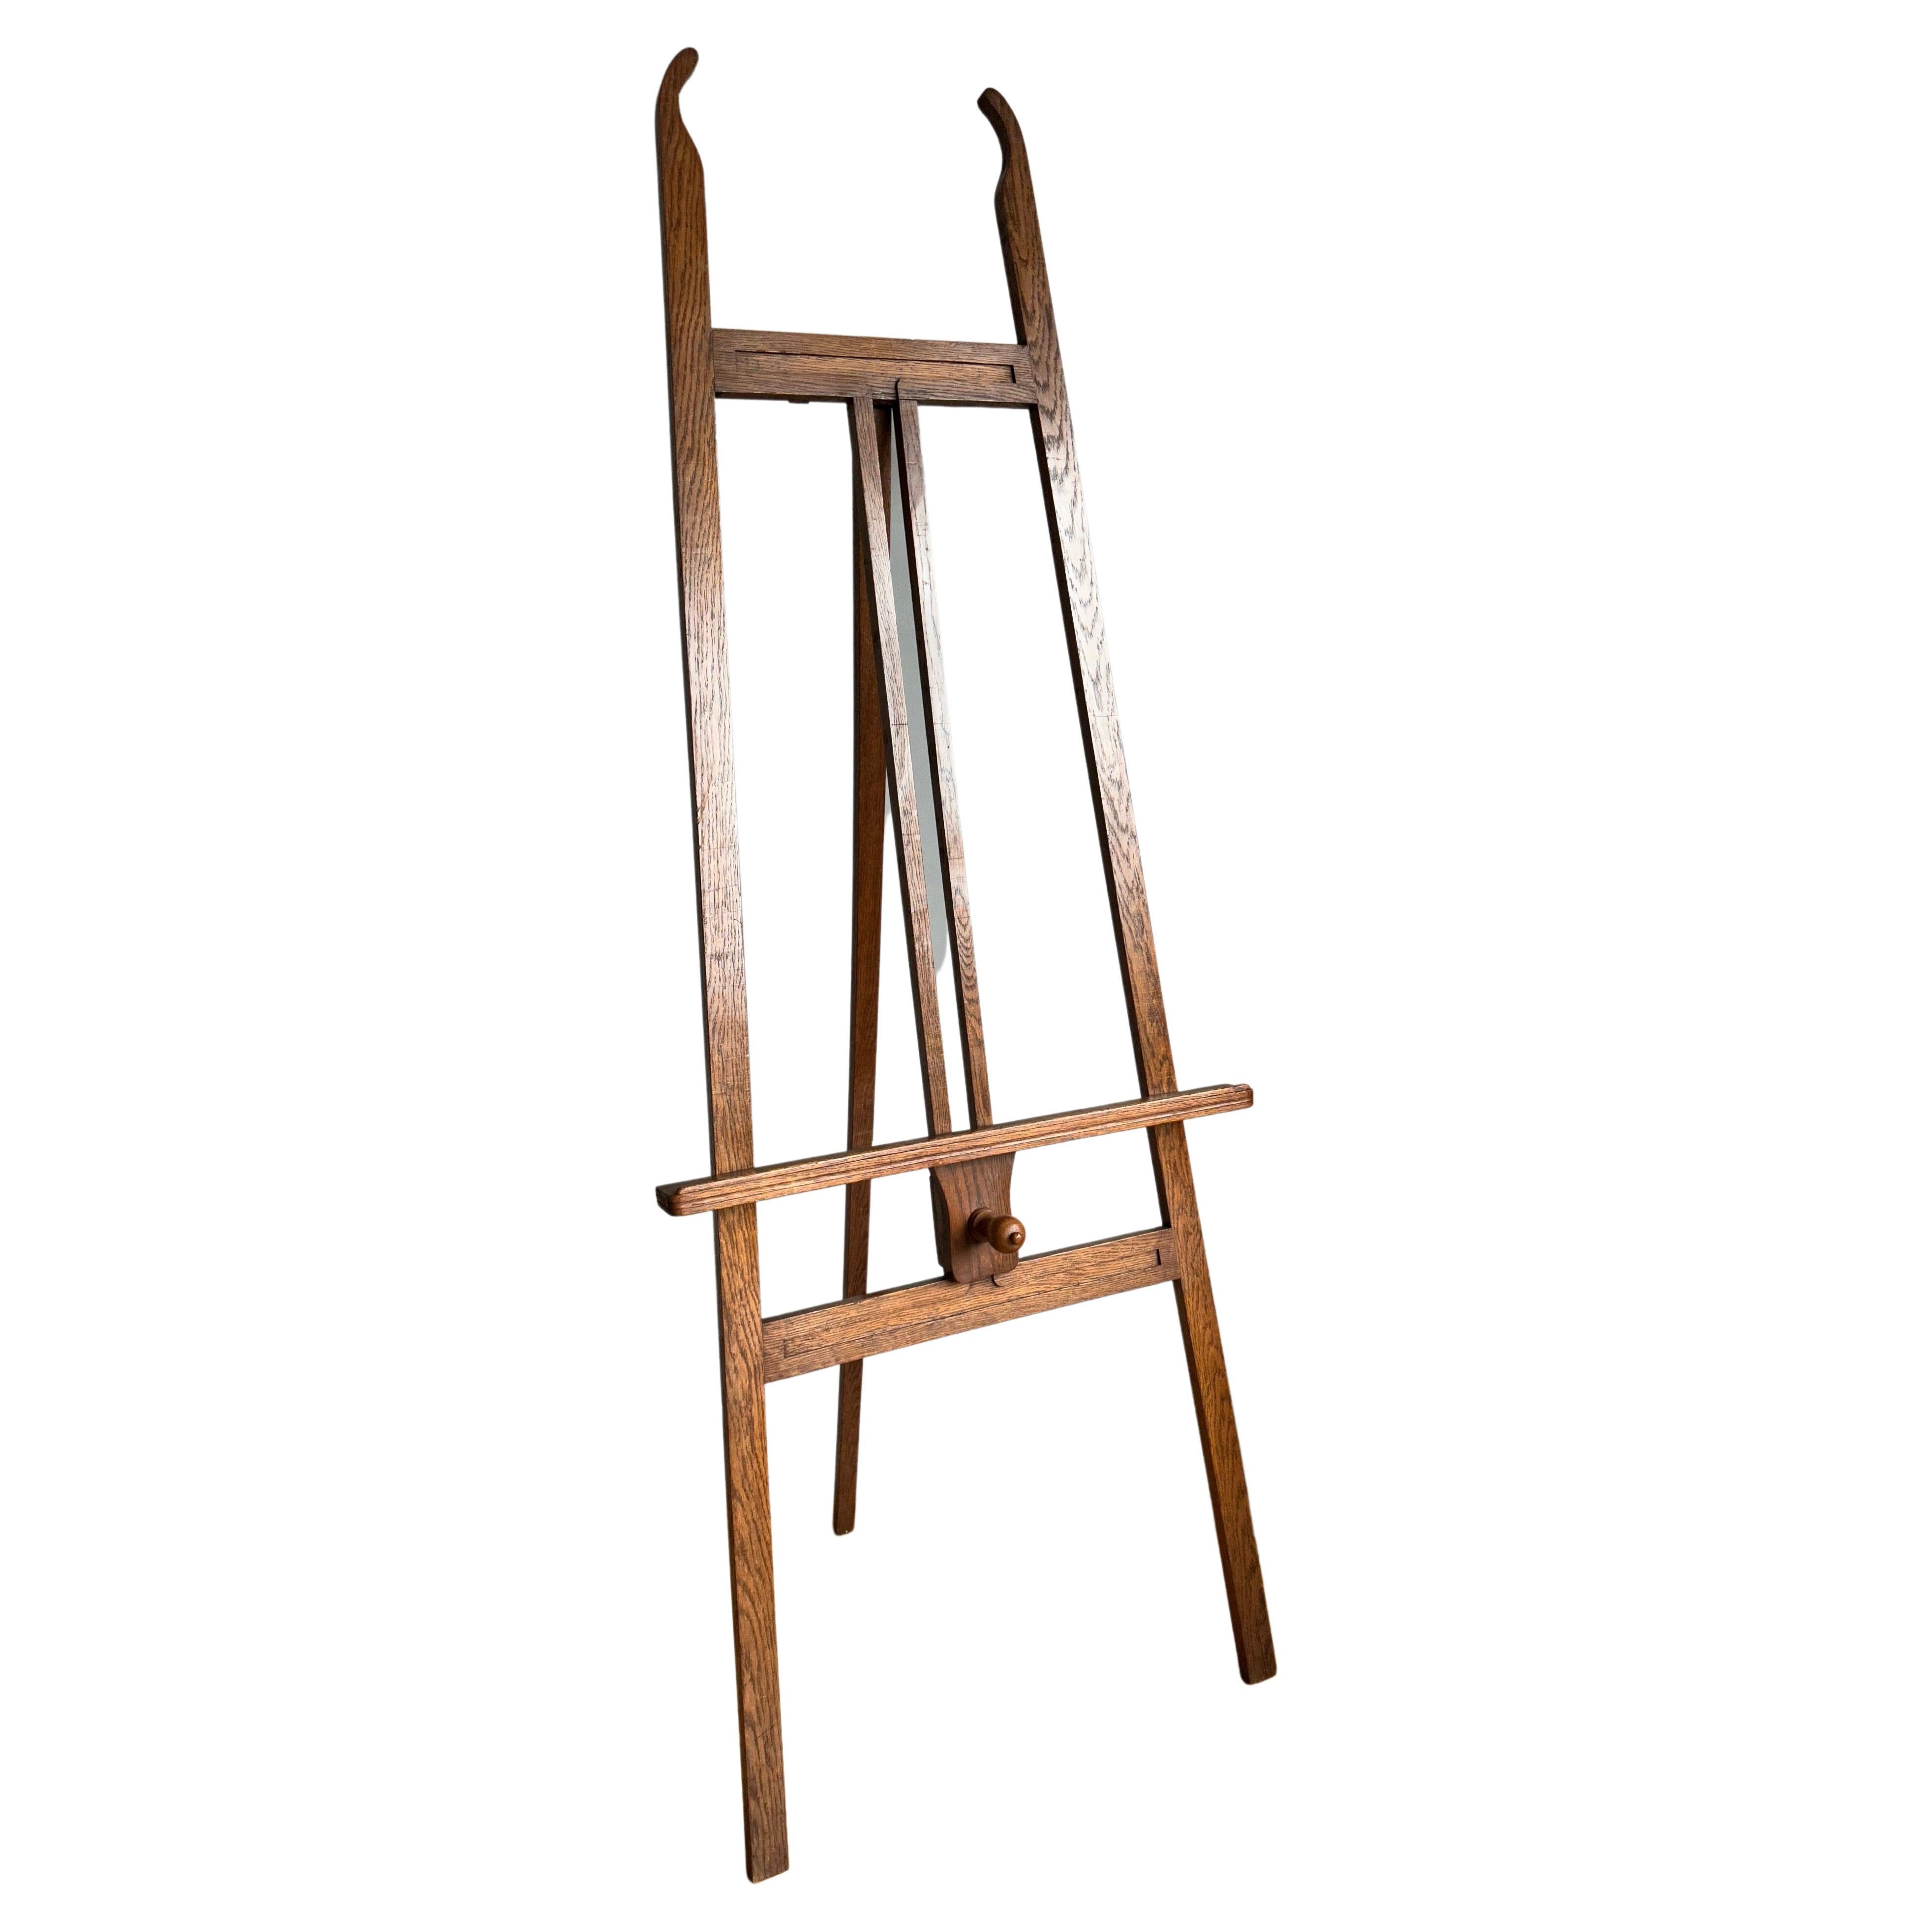 Unique Antique Handmade Arts and Crafts Floor Easel / Artist Display Stand  ca 1910 For Sale at 1stDibs